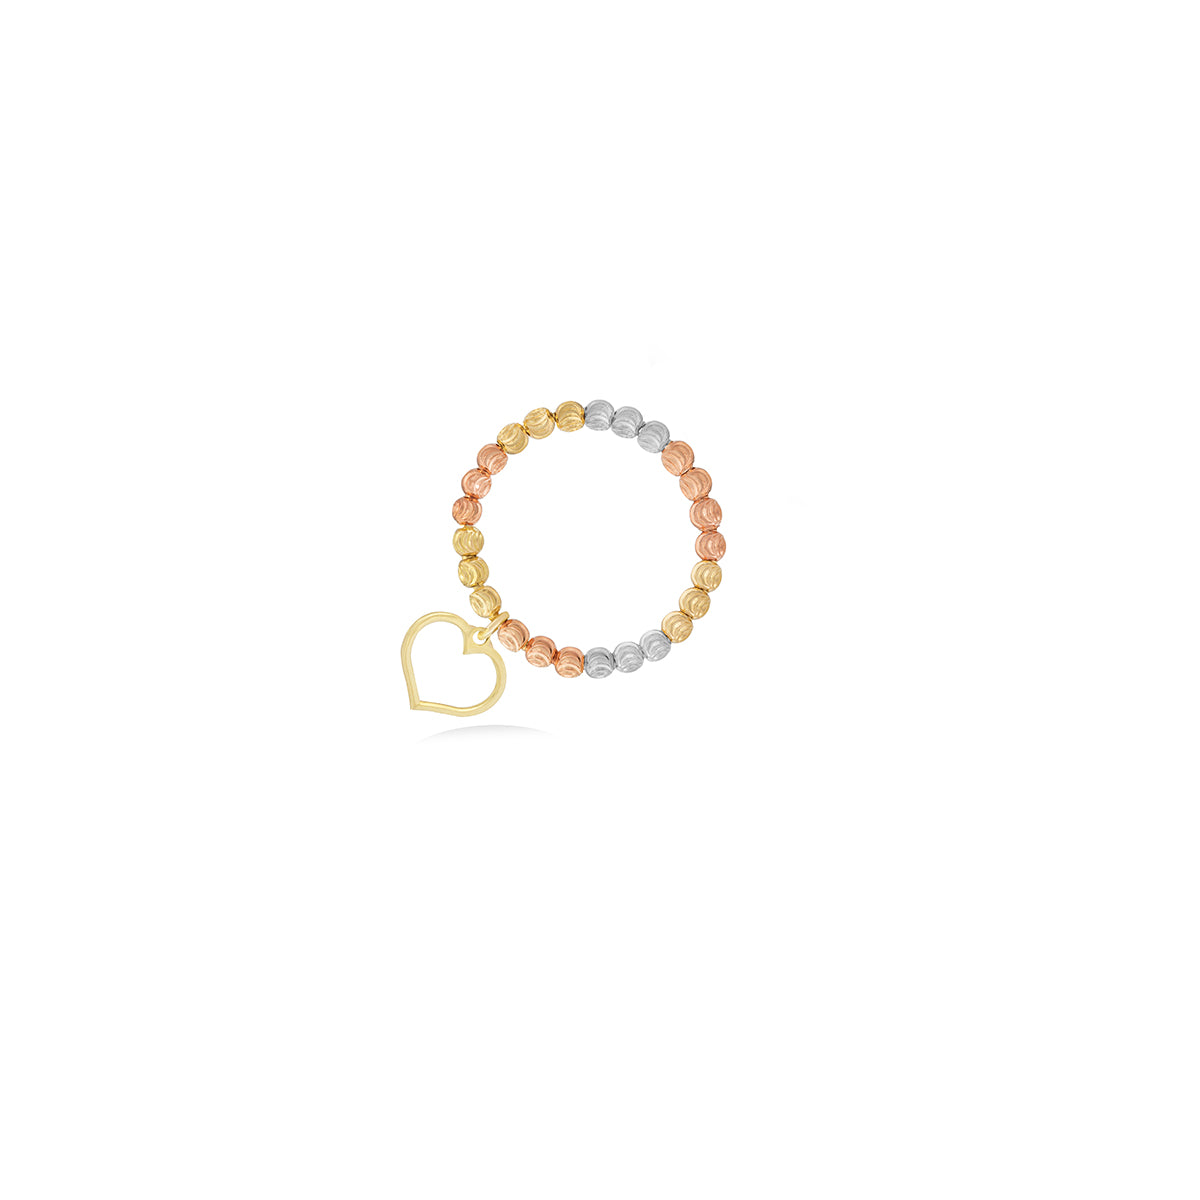 Beaded Ring with Heart Charm in 18K Gold